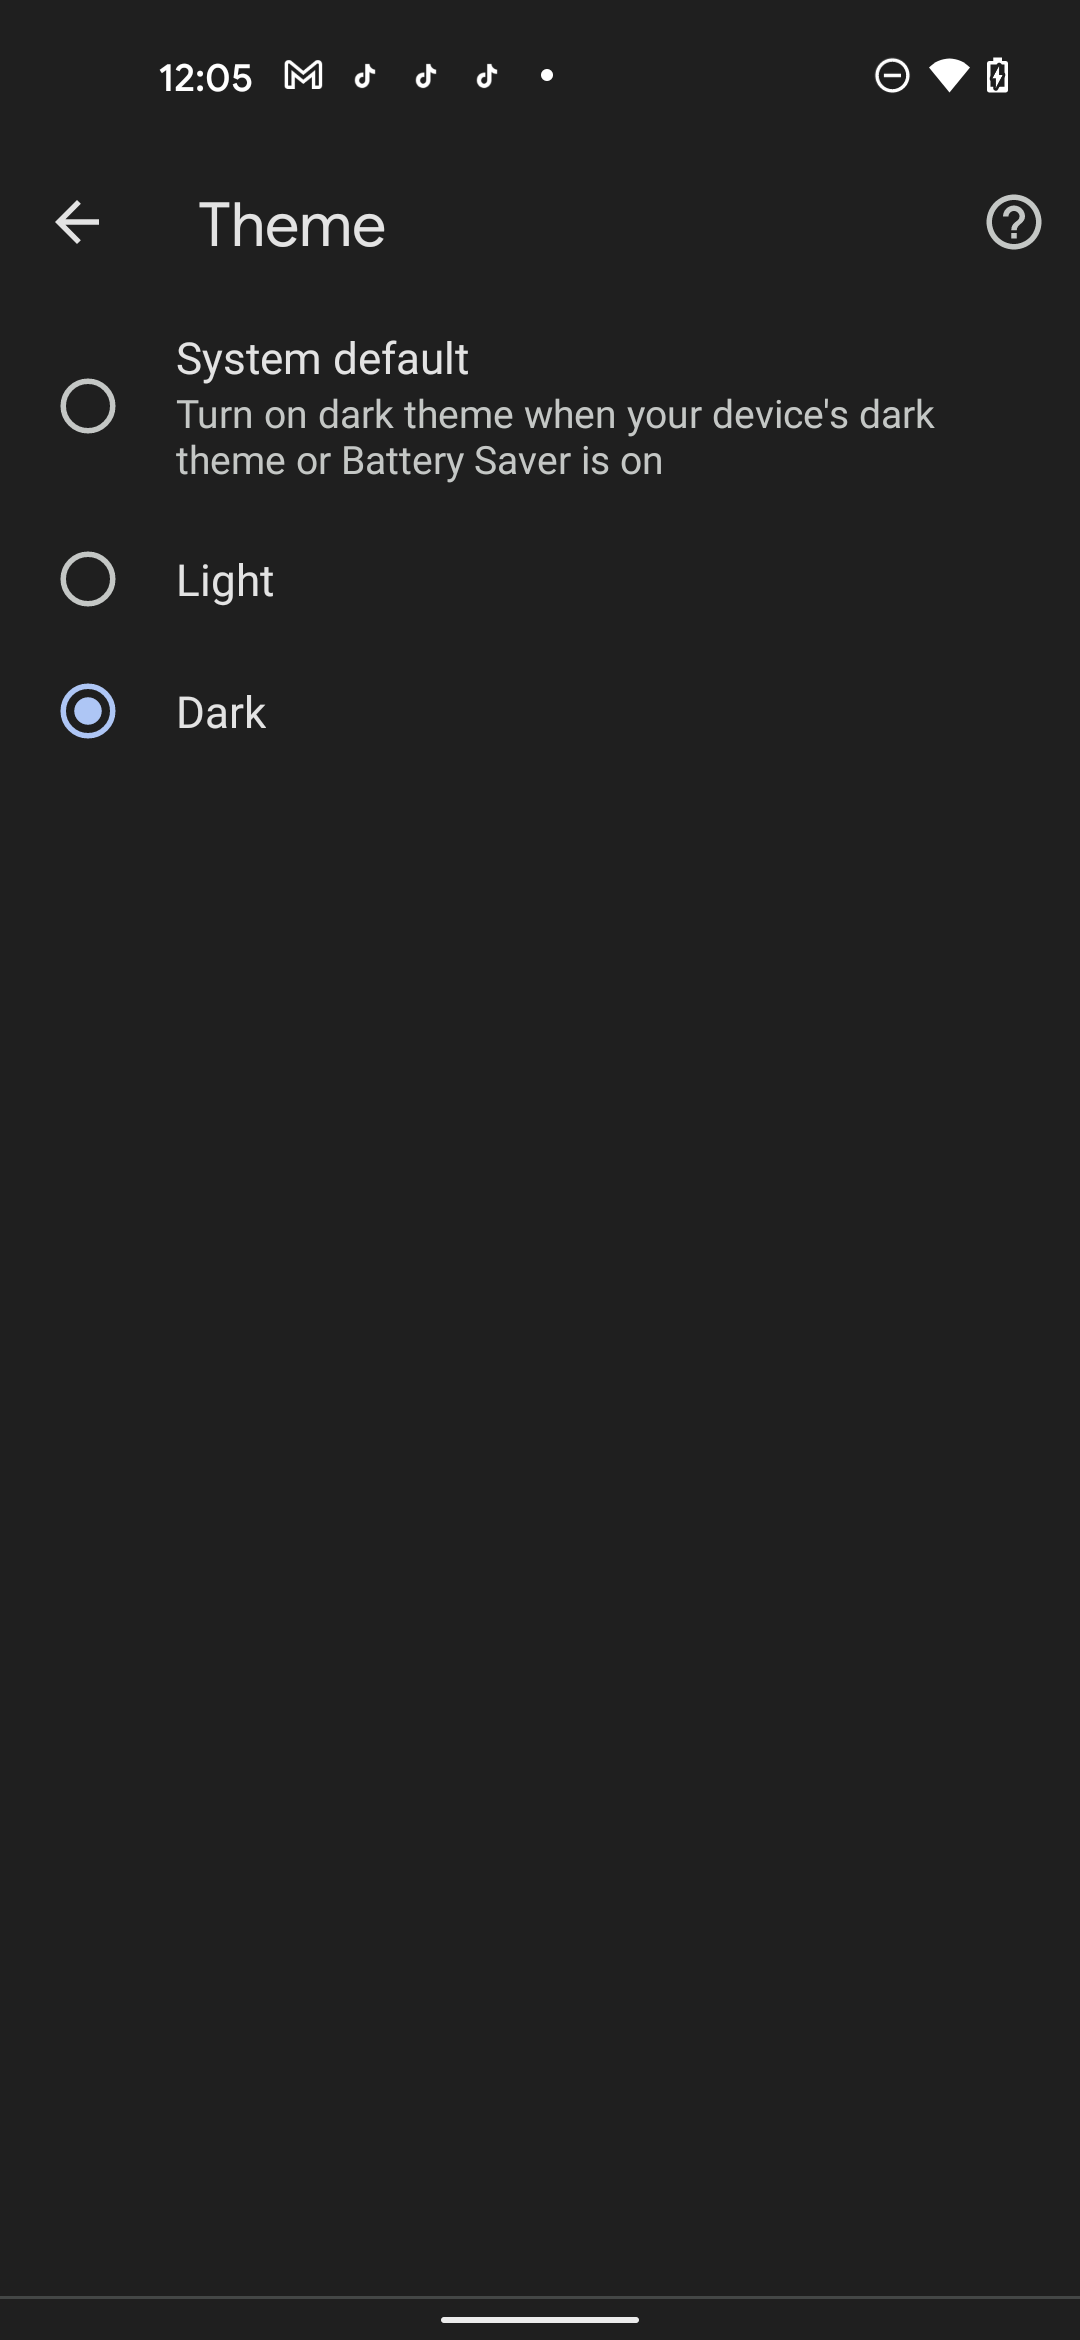 chrome dark mode - android theme page